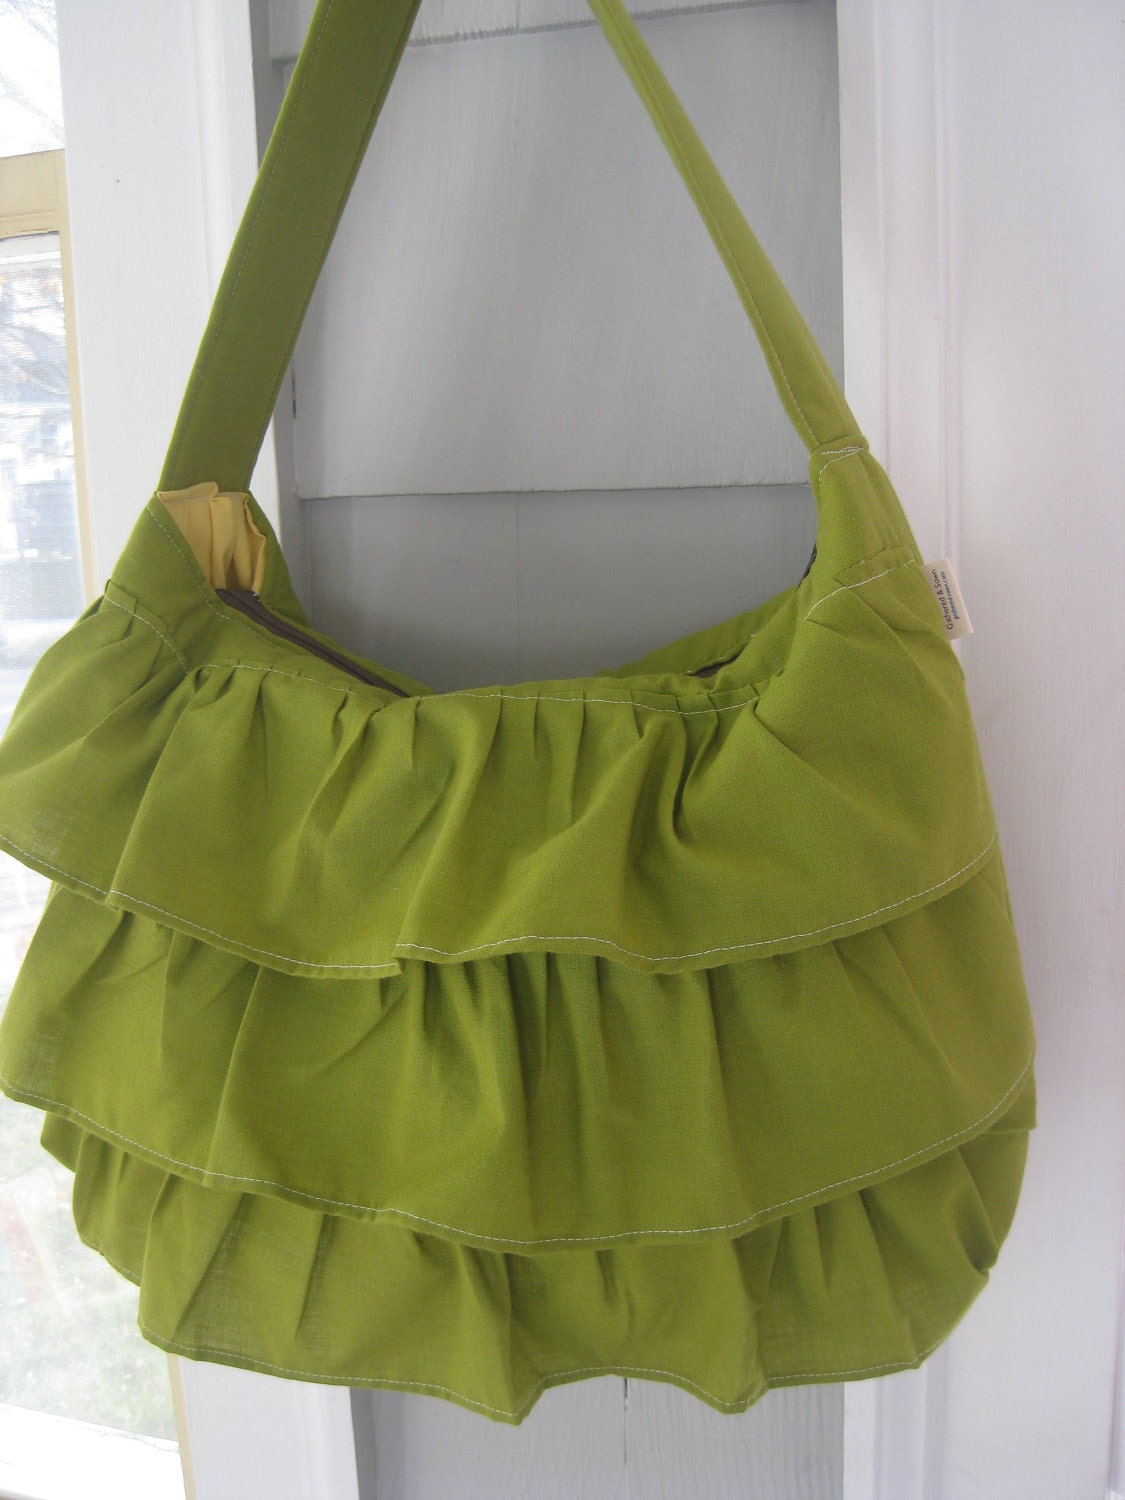 Avocado Green Ruffle Purse Large with Shoulder Strap in Rich Vintage Cotton